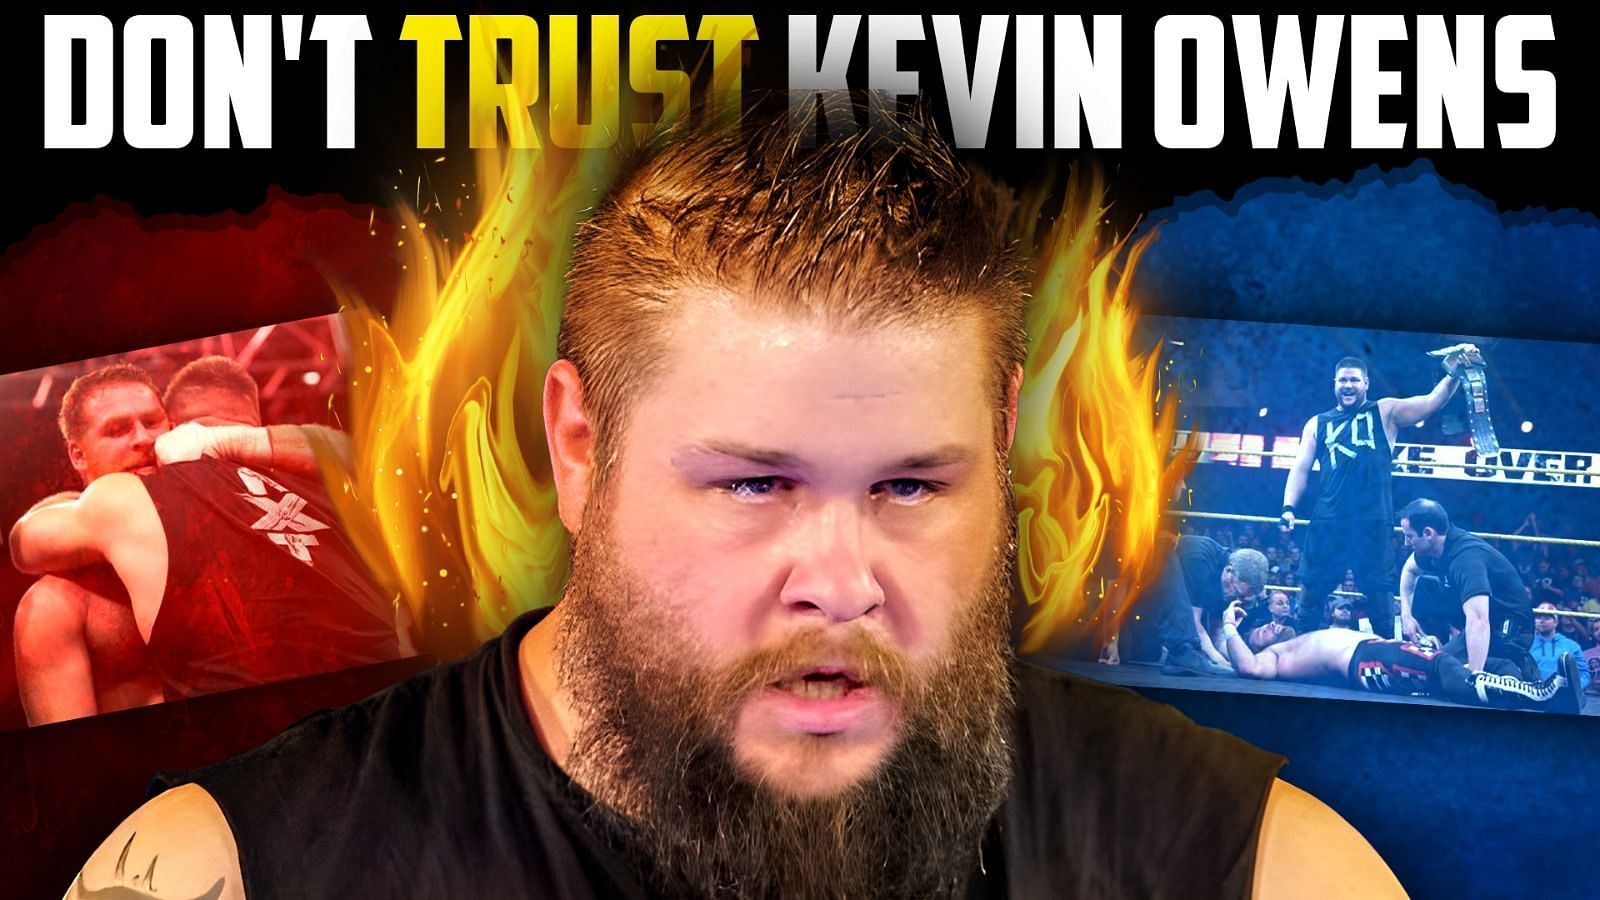 How Kevin Owens betrayed everyone to rise to the top of WWE